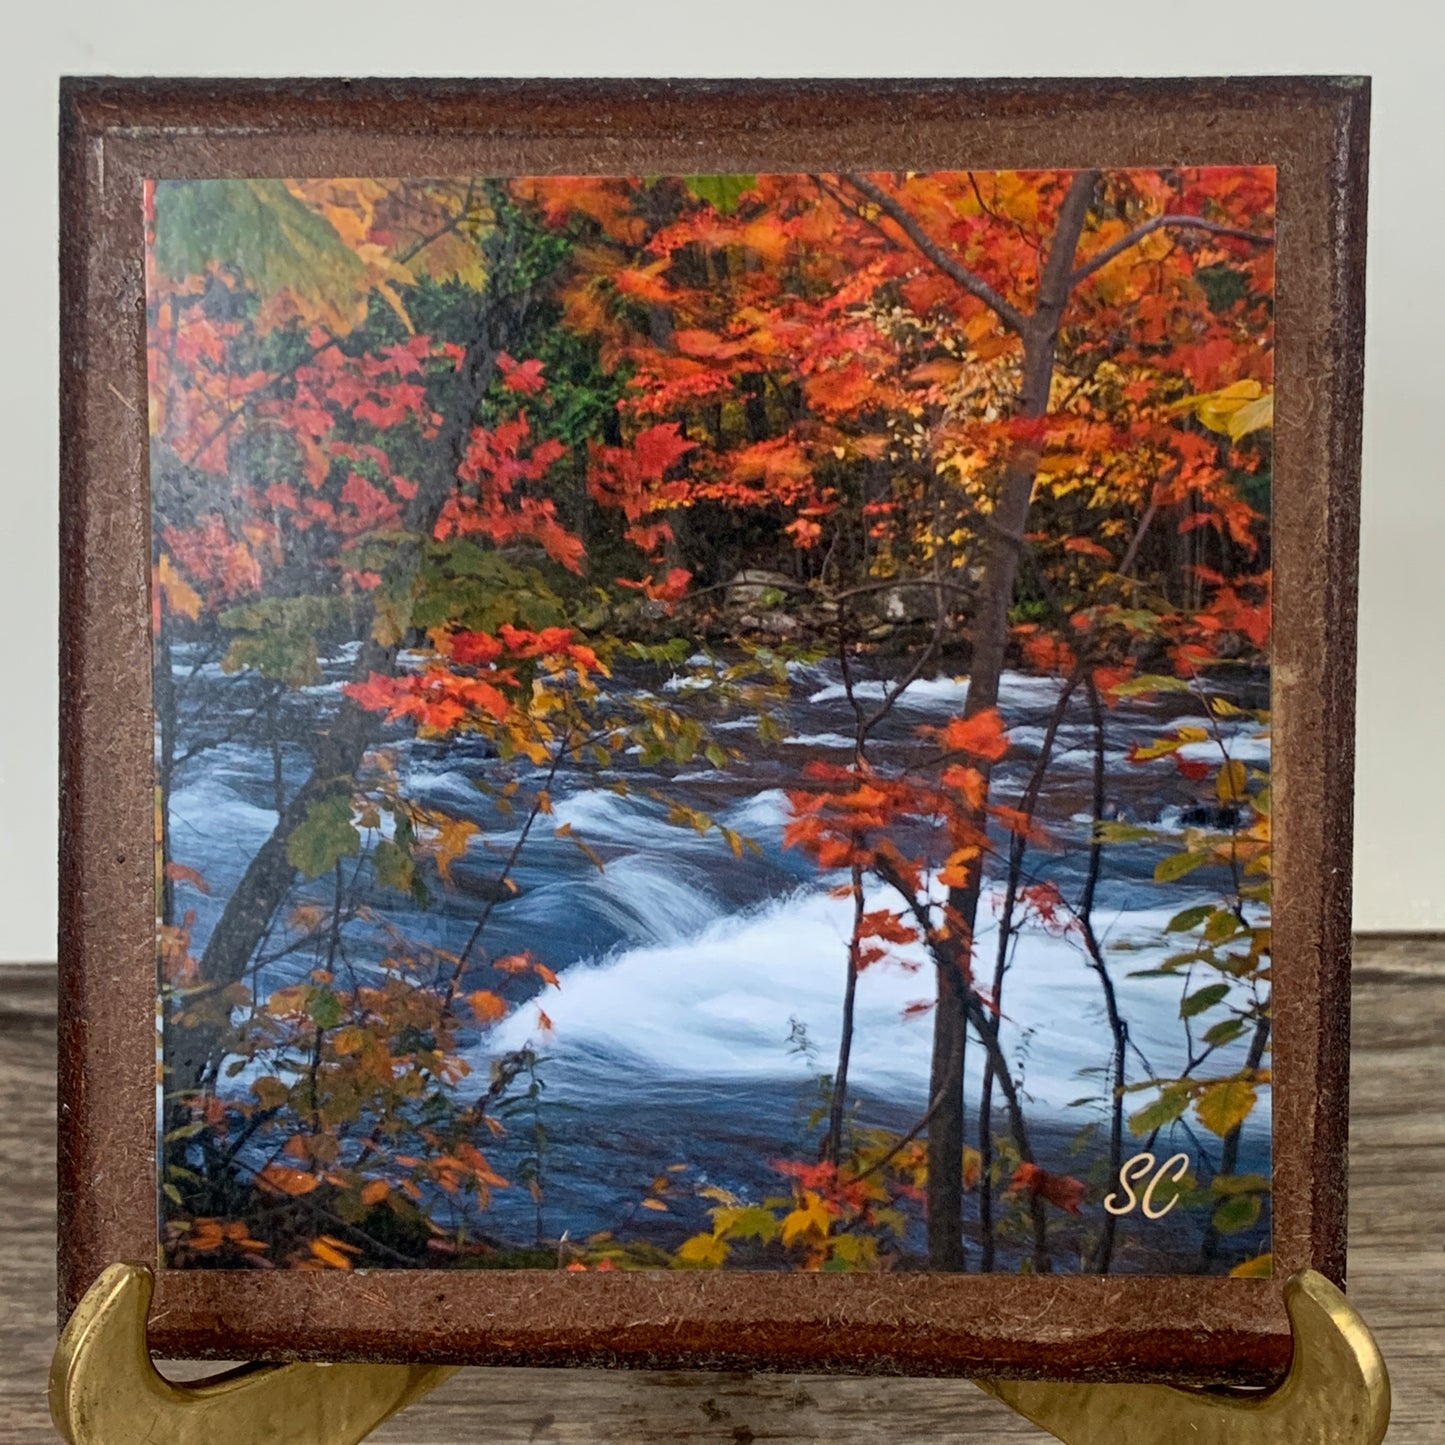 Set of 4 Cork Backed Coasters with Autumn Landscape Scenes